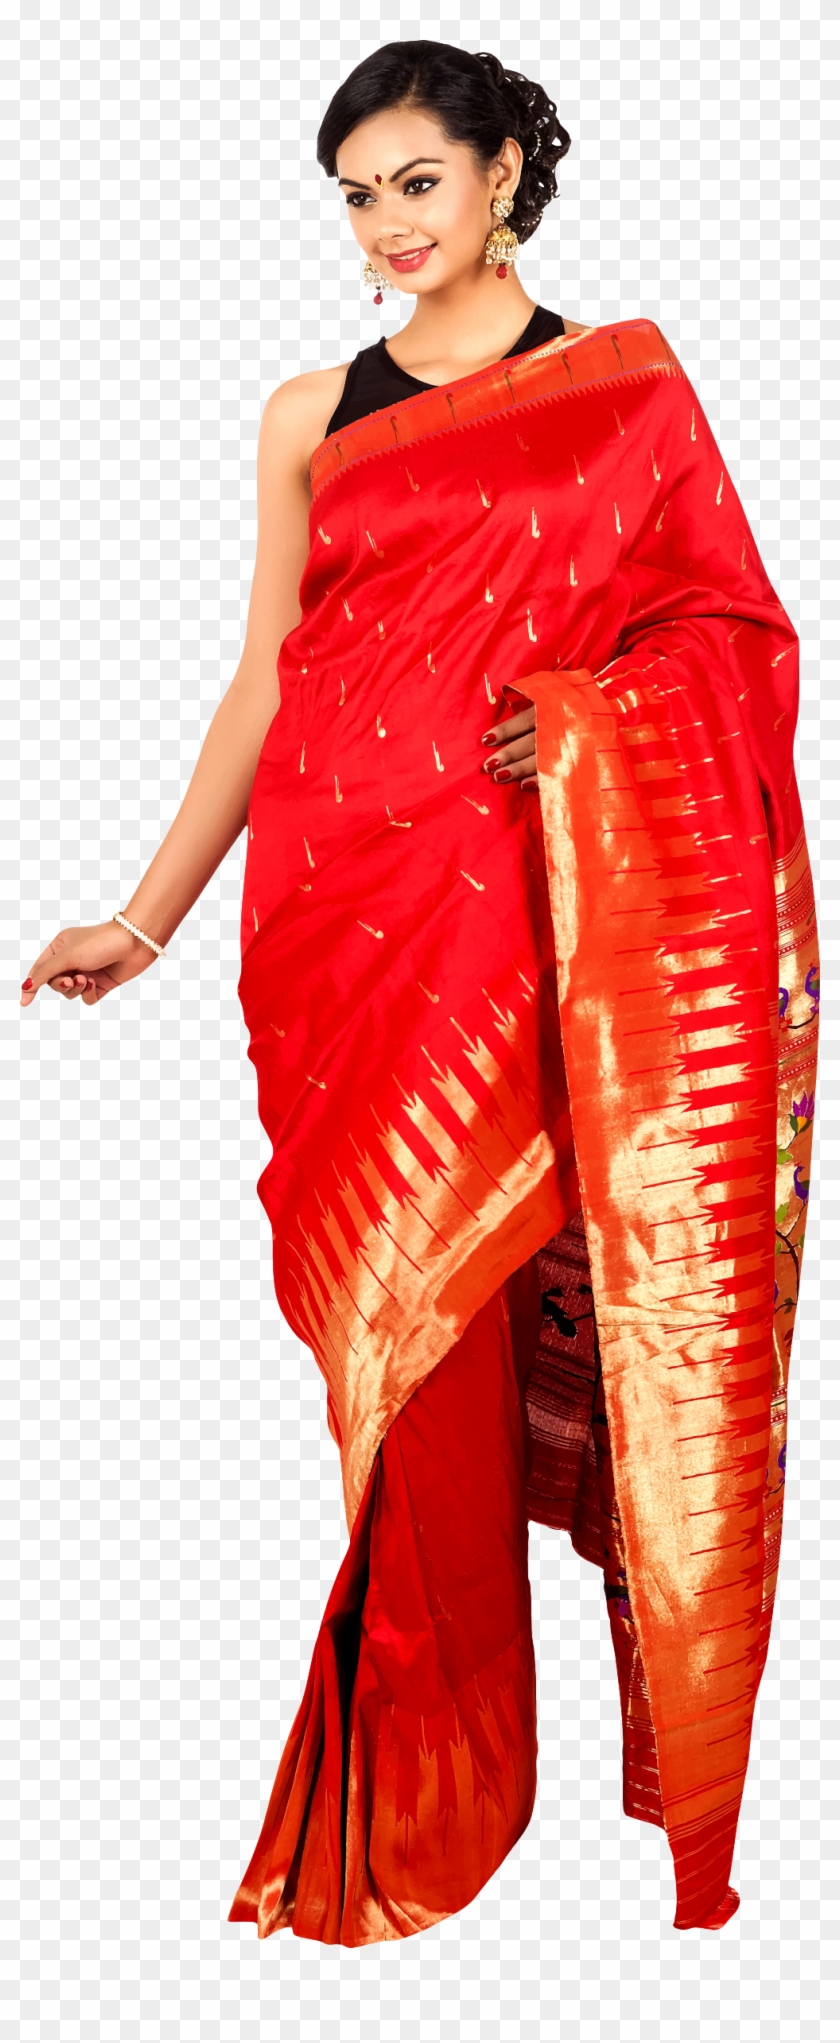 This Free Icons Png Design Of Woman In Saree 6 Clipart #894053